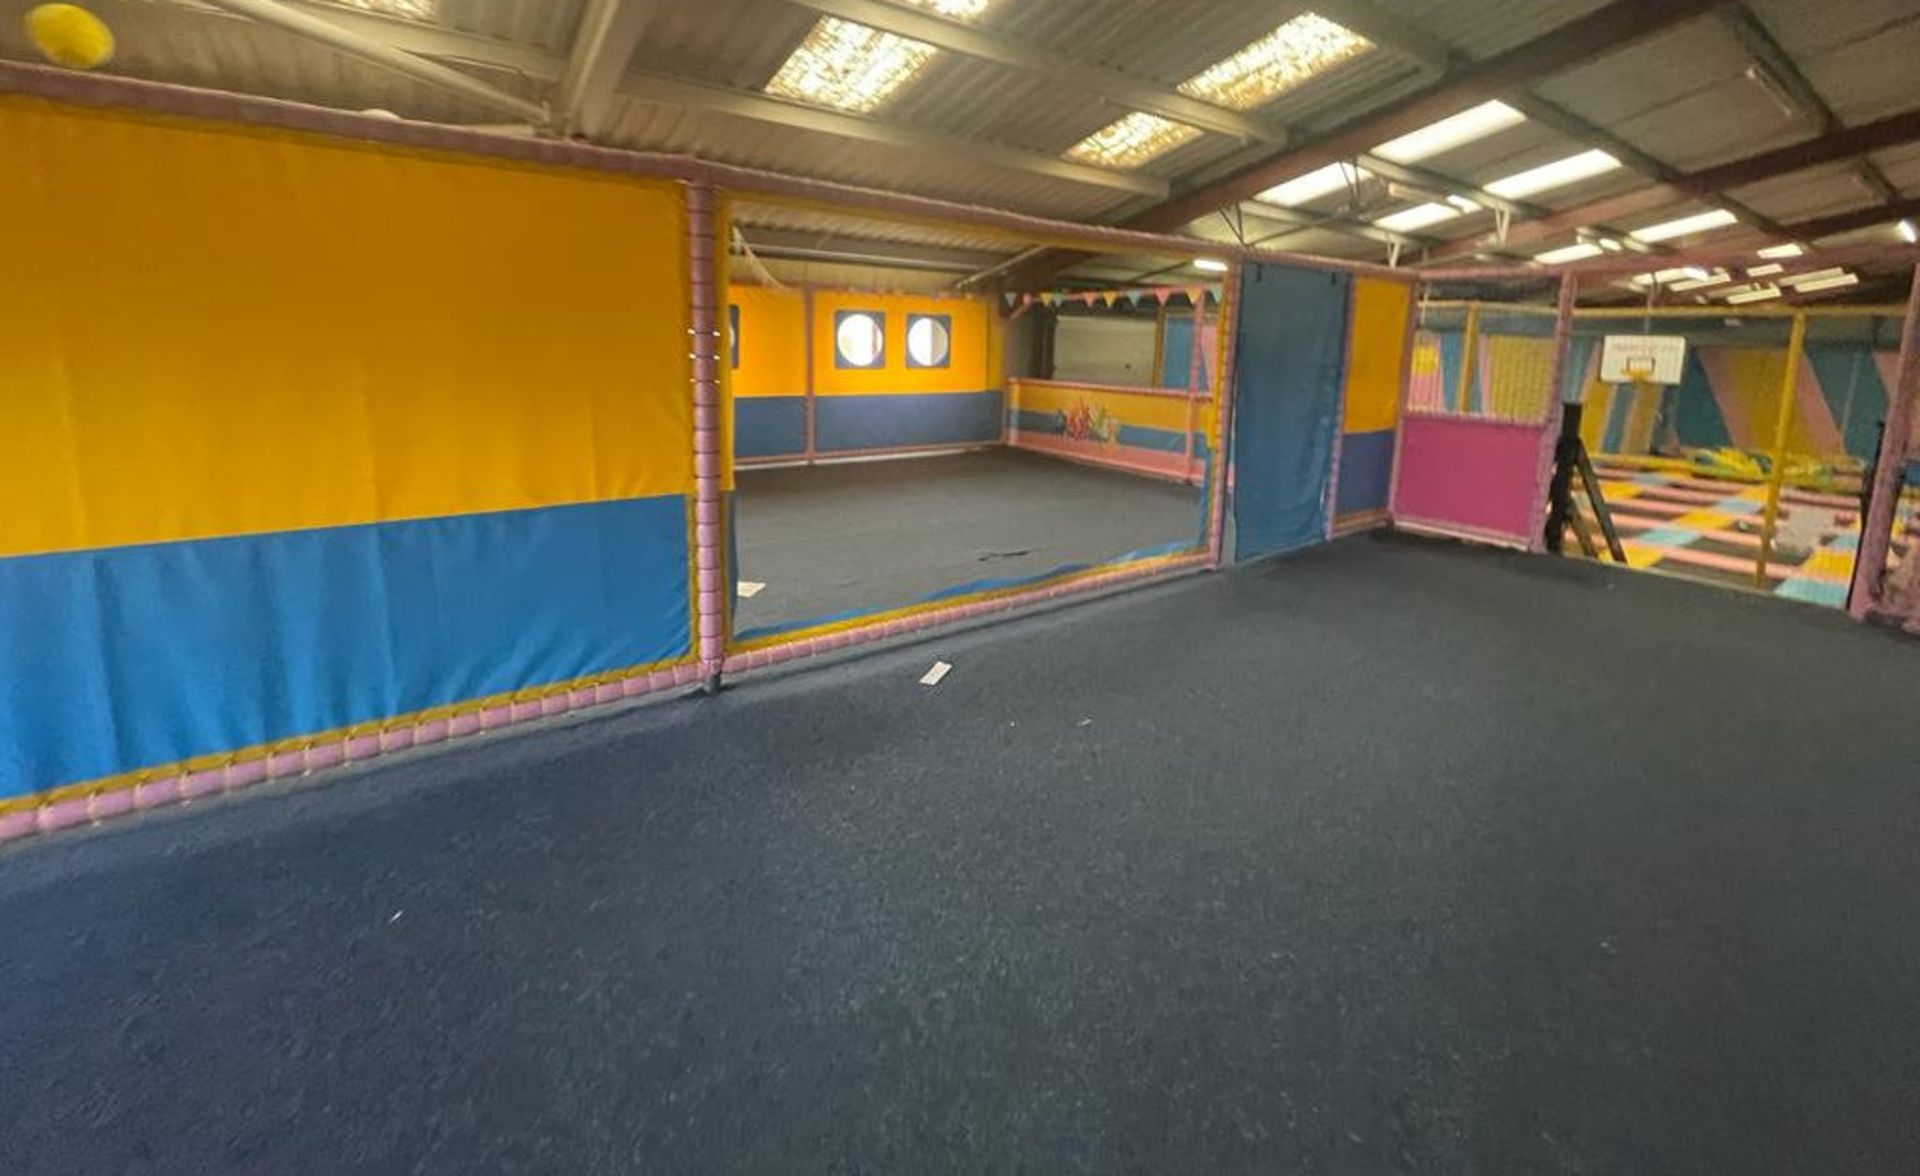 1 x Trampoline Park With Over 40 Interconnected Trampolines, Inflatable Activity Area, Waiting - Image 60 of 99